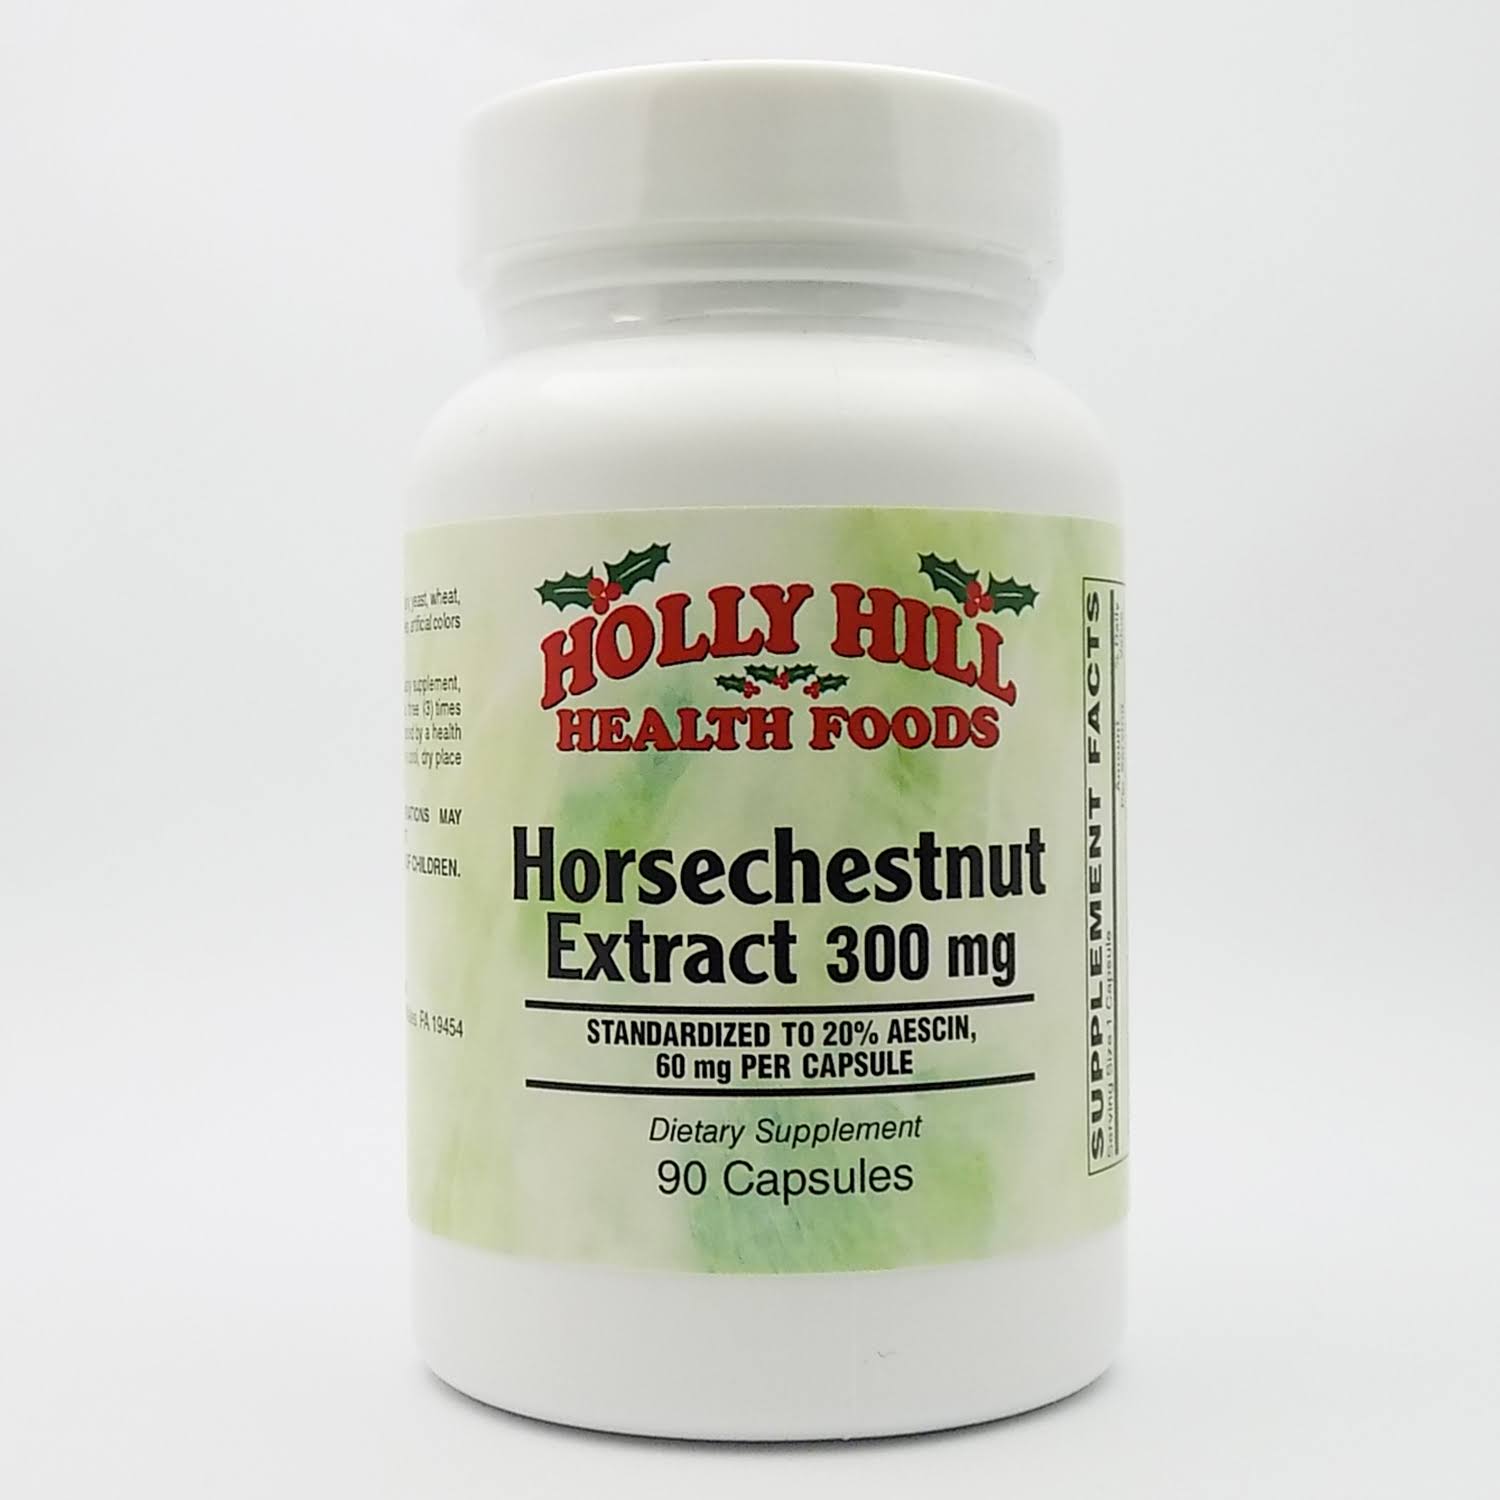 Holly Hill Health Foods, Horsechestnut Extract, 300 mg, 90 Capsules